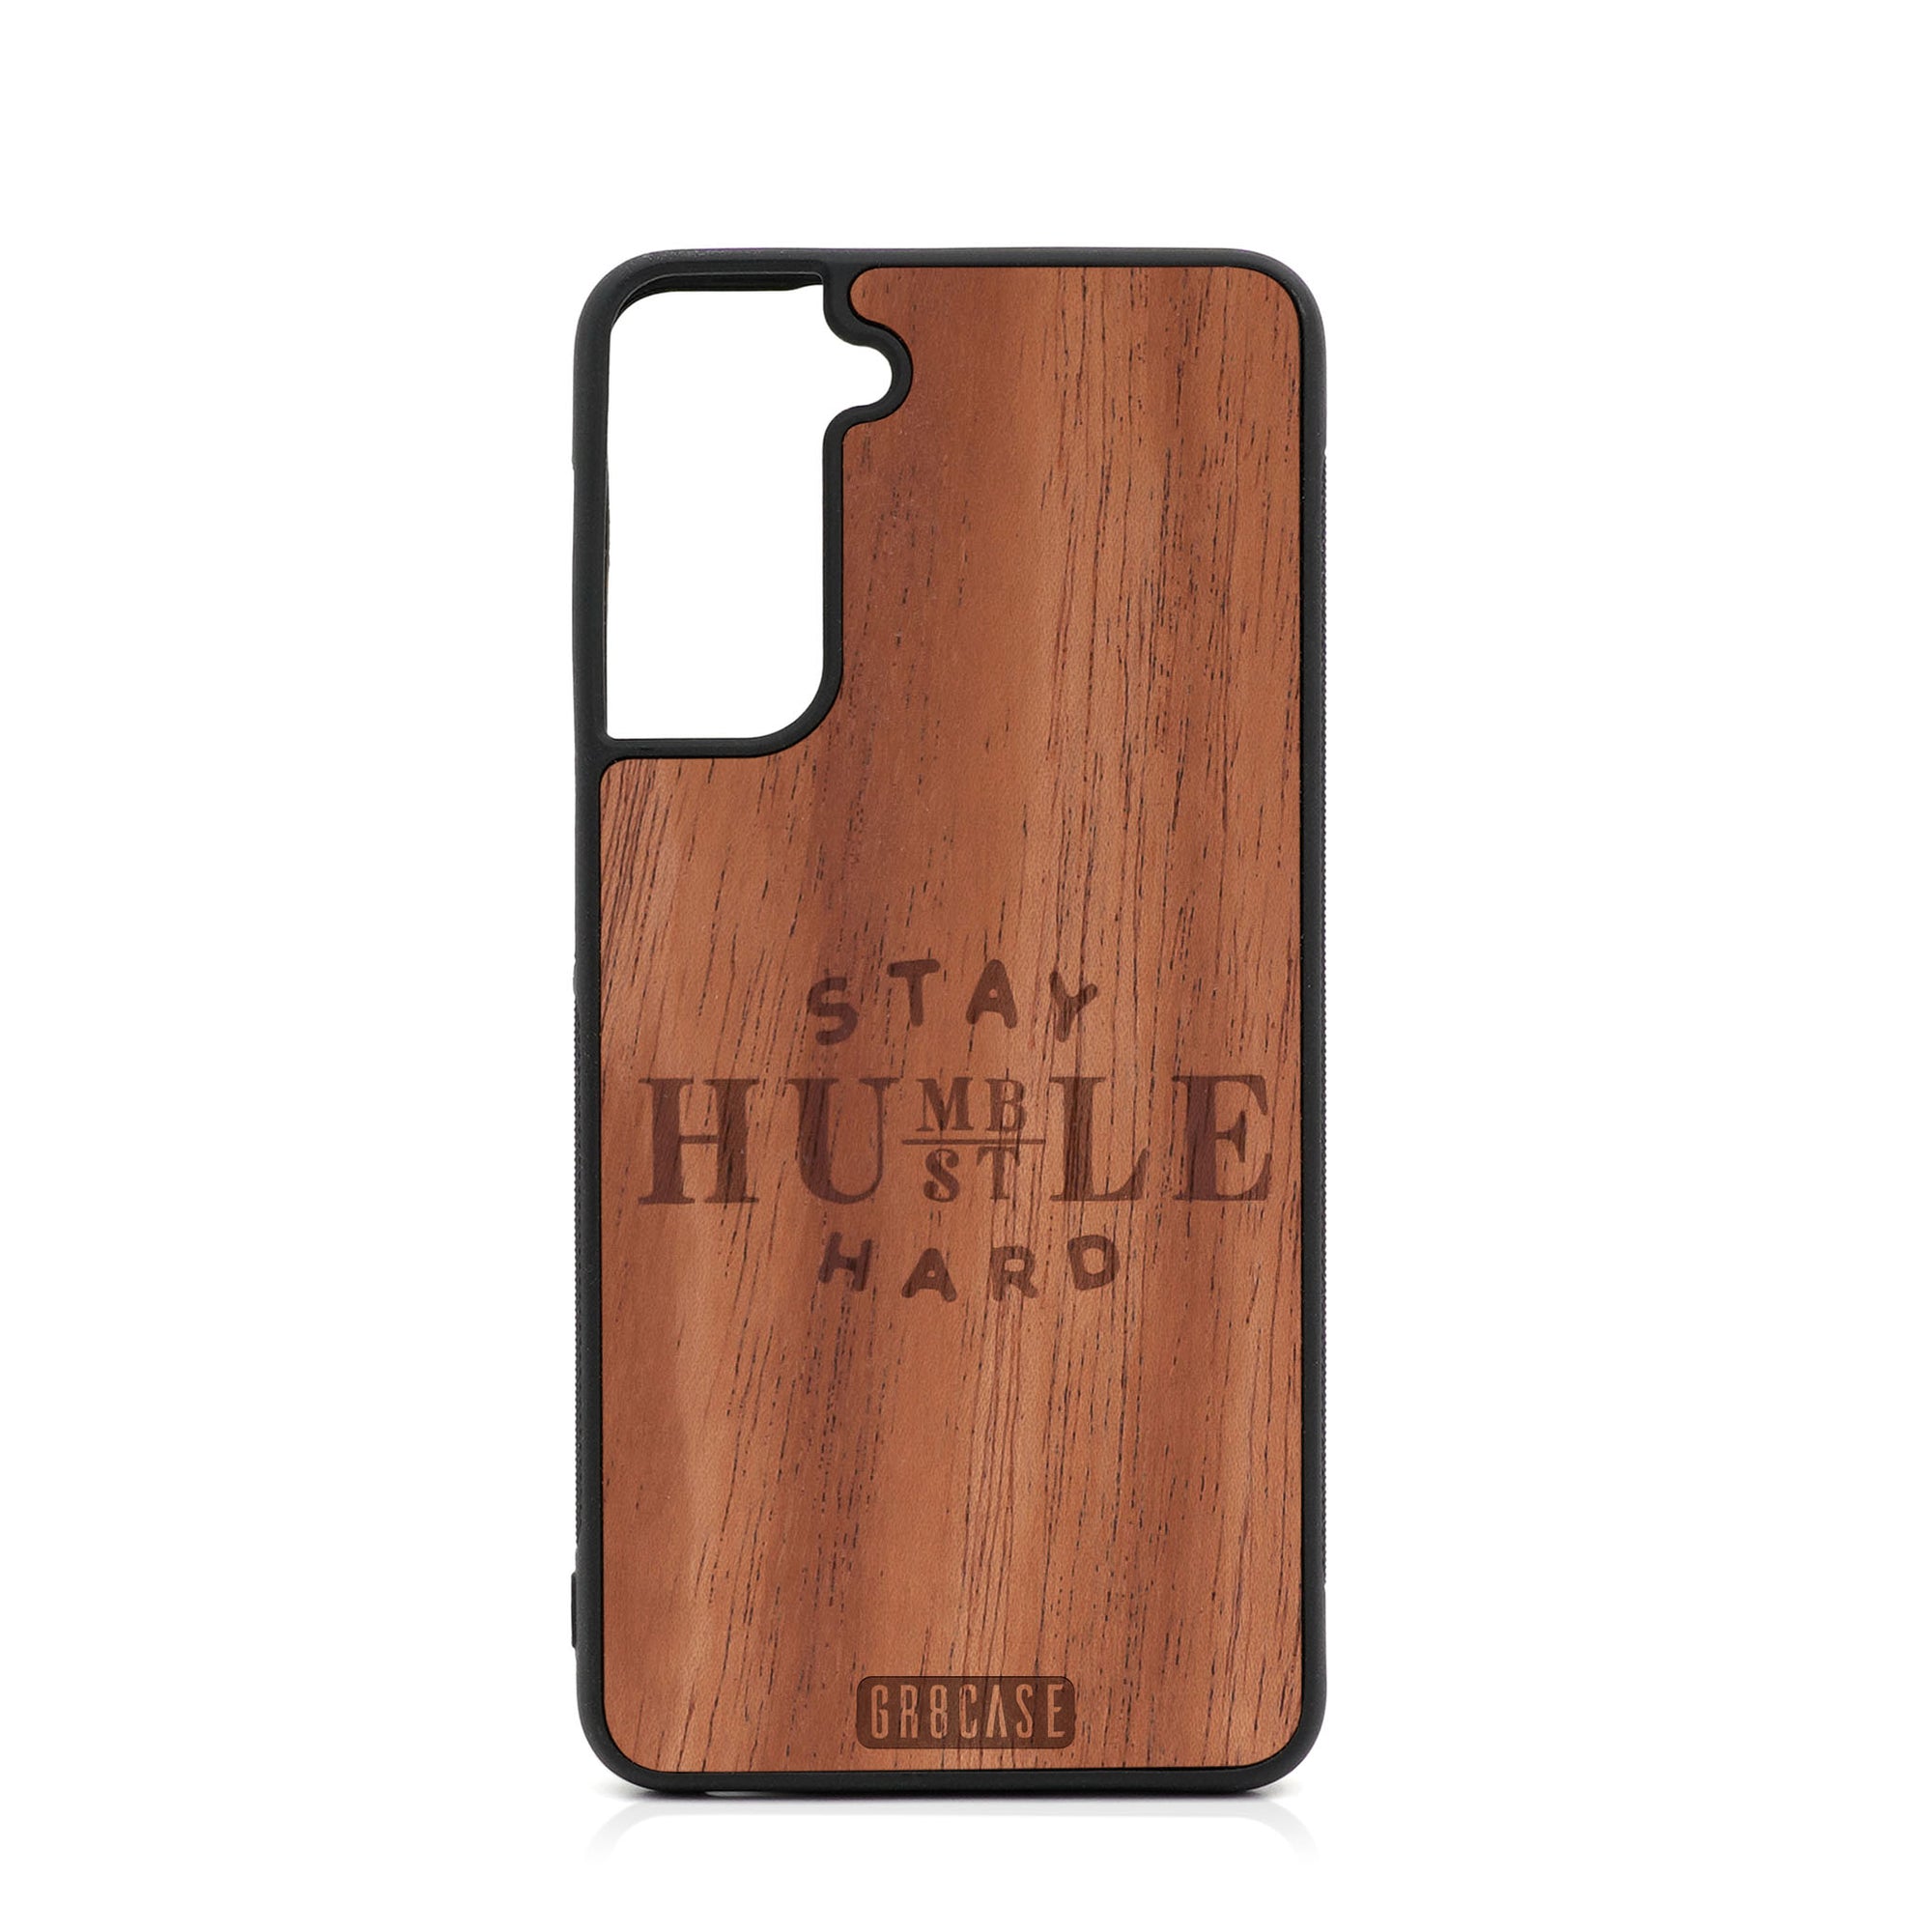 Stay Humble Hustle Hard Design Wood Case For Samsung Galaxy S21 Plus 5G